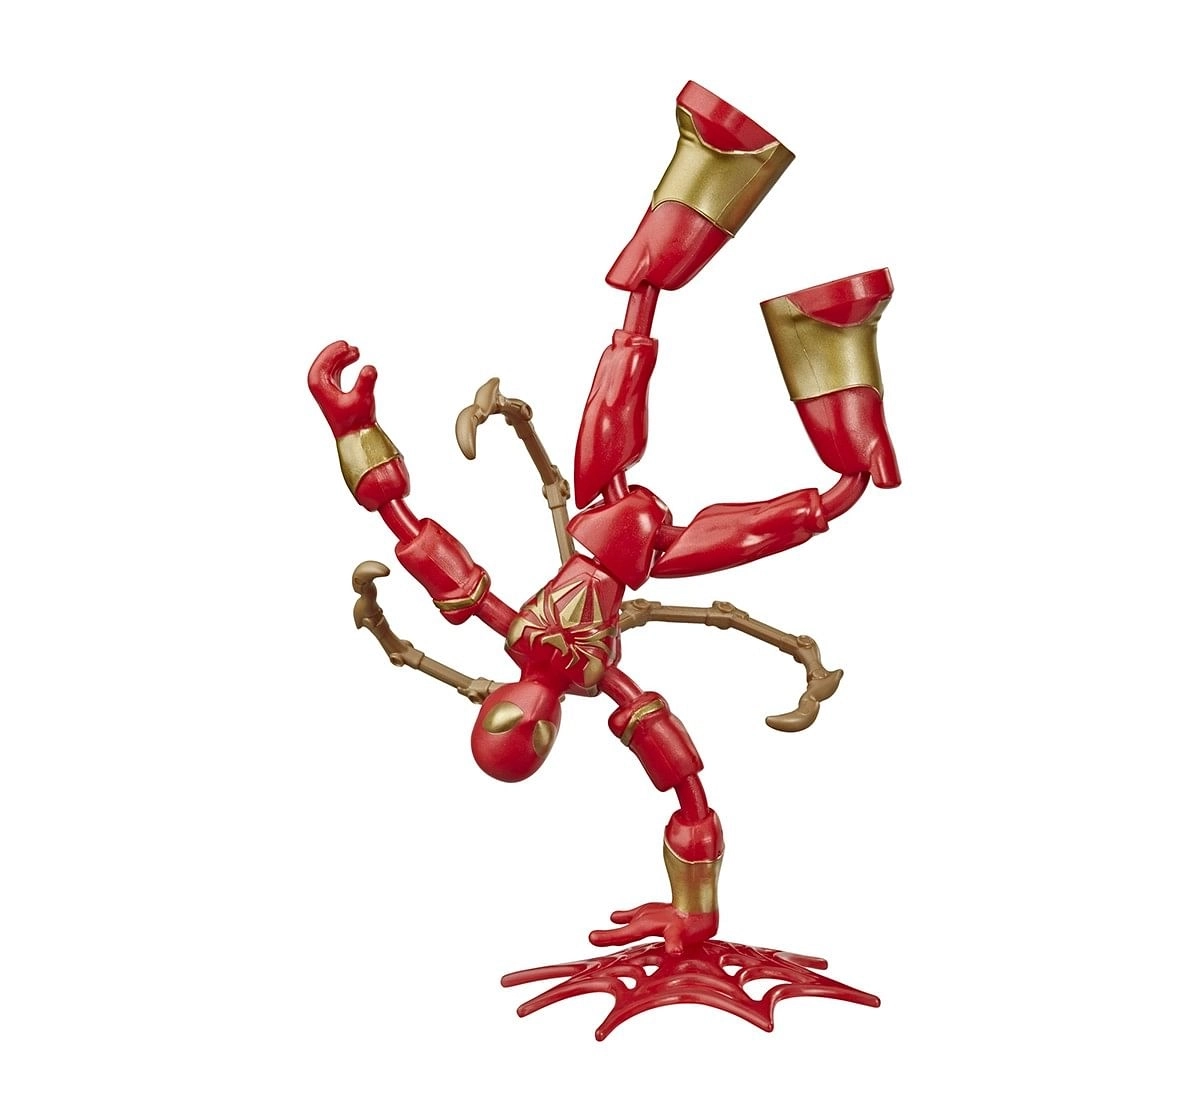 Marvel Spider-Man Bend and Flex Iron Spider Action Figure Toy, 6-Inch Flexible Figure, Includes Blast Accessories, For Kids Ages 4 And Up 